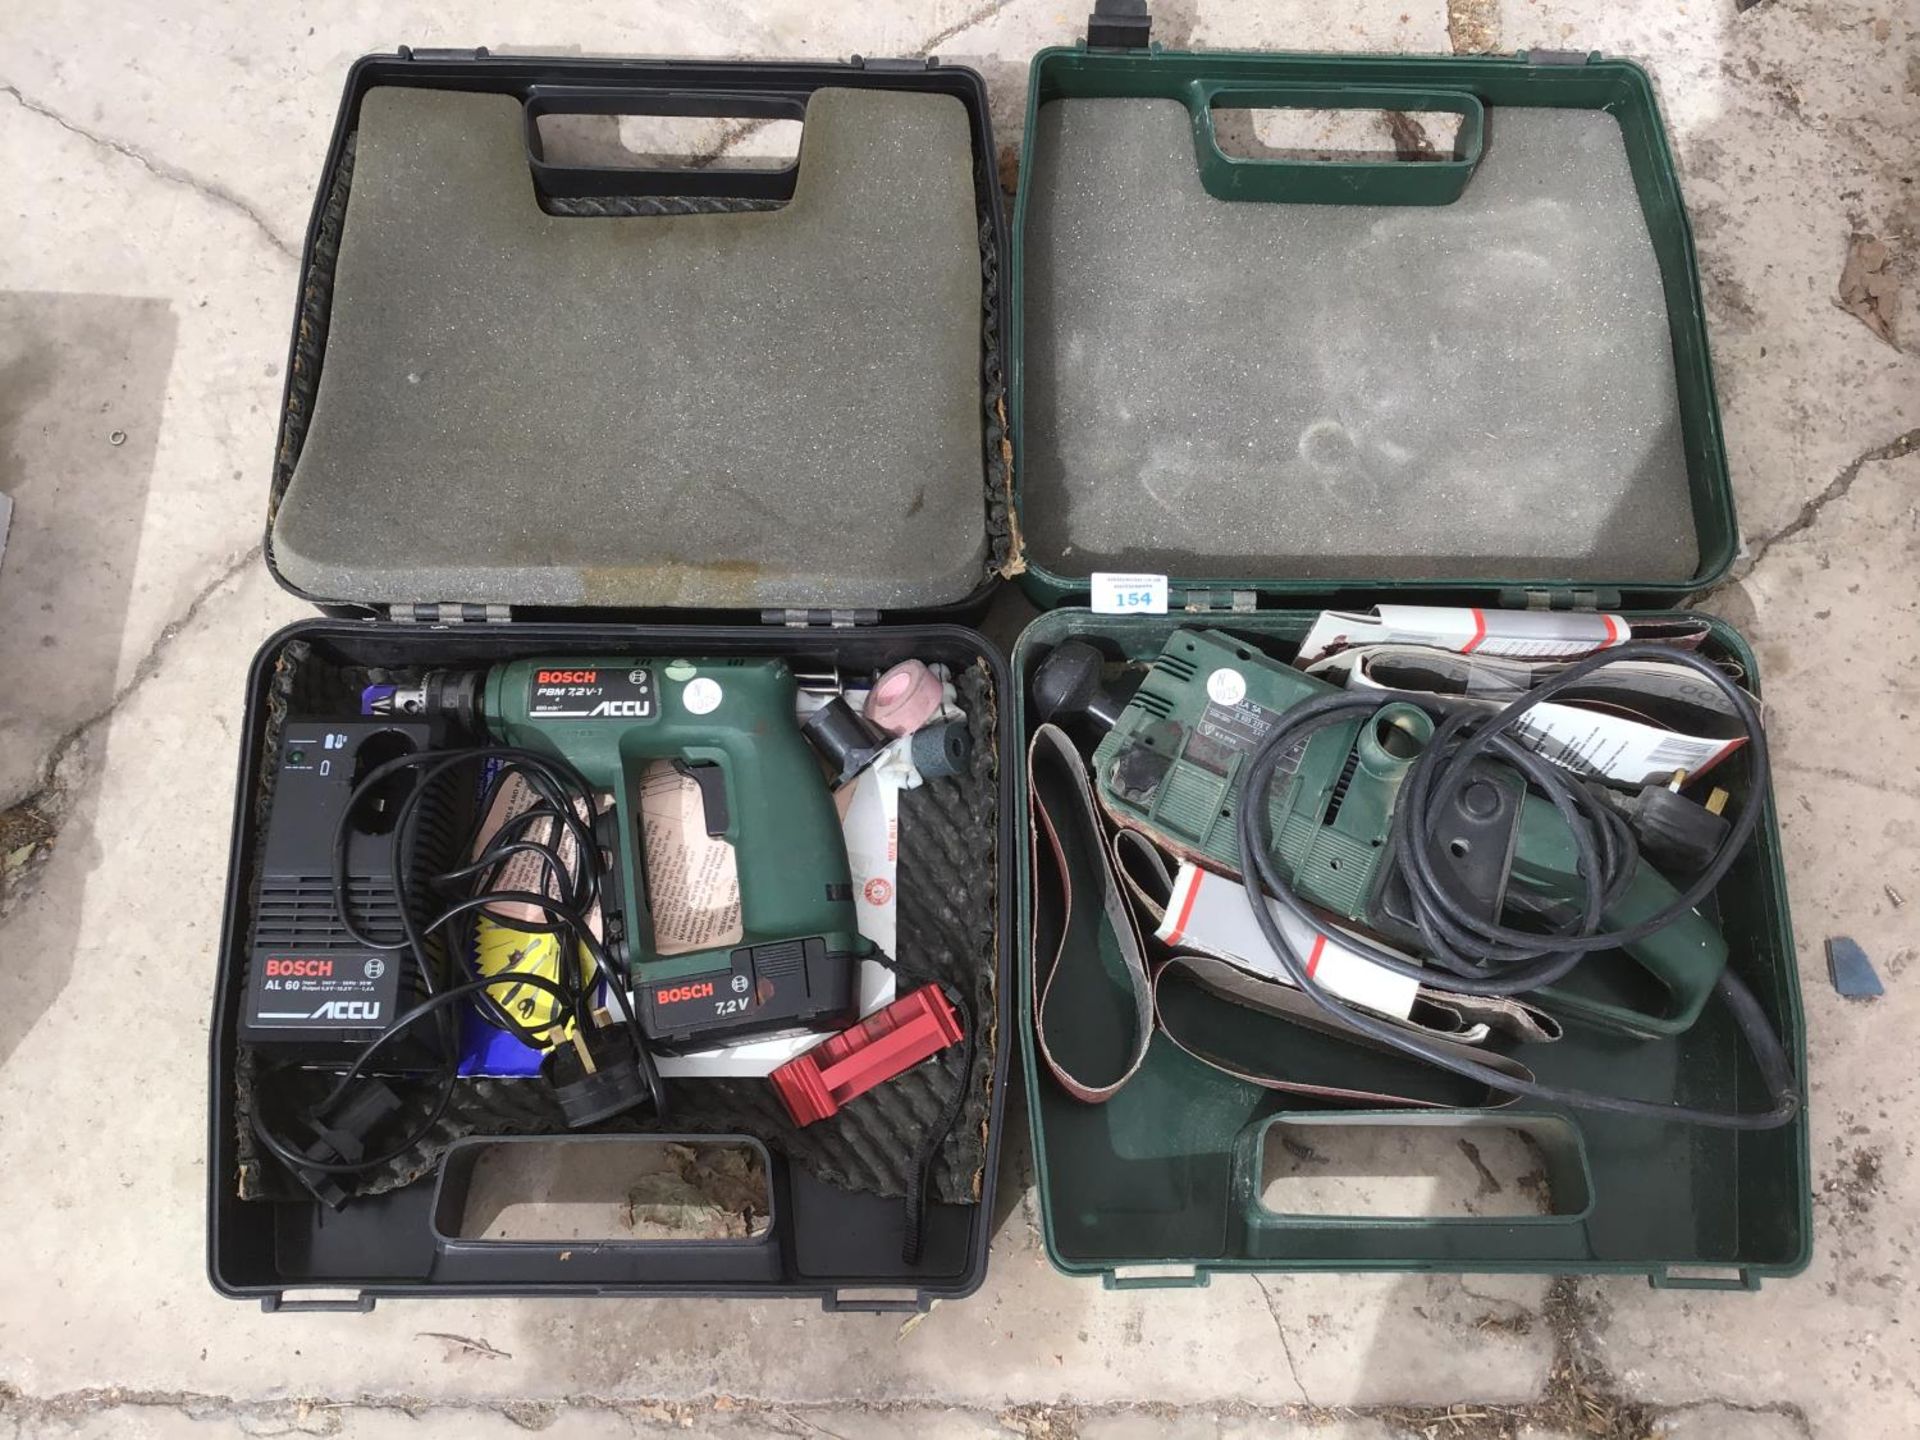 A BOSCH BELT SANDER IN A CASE AND A BOSCH PBM 7-2V-1 CORDLESS DRILL IN CASE WITH BATTERY AND CHARGER